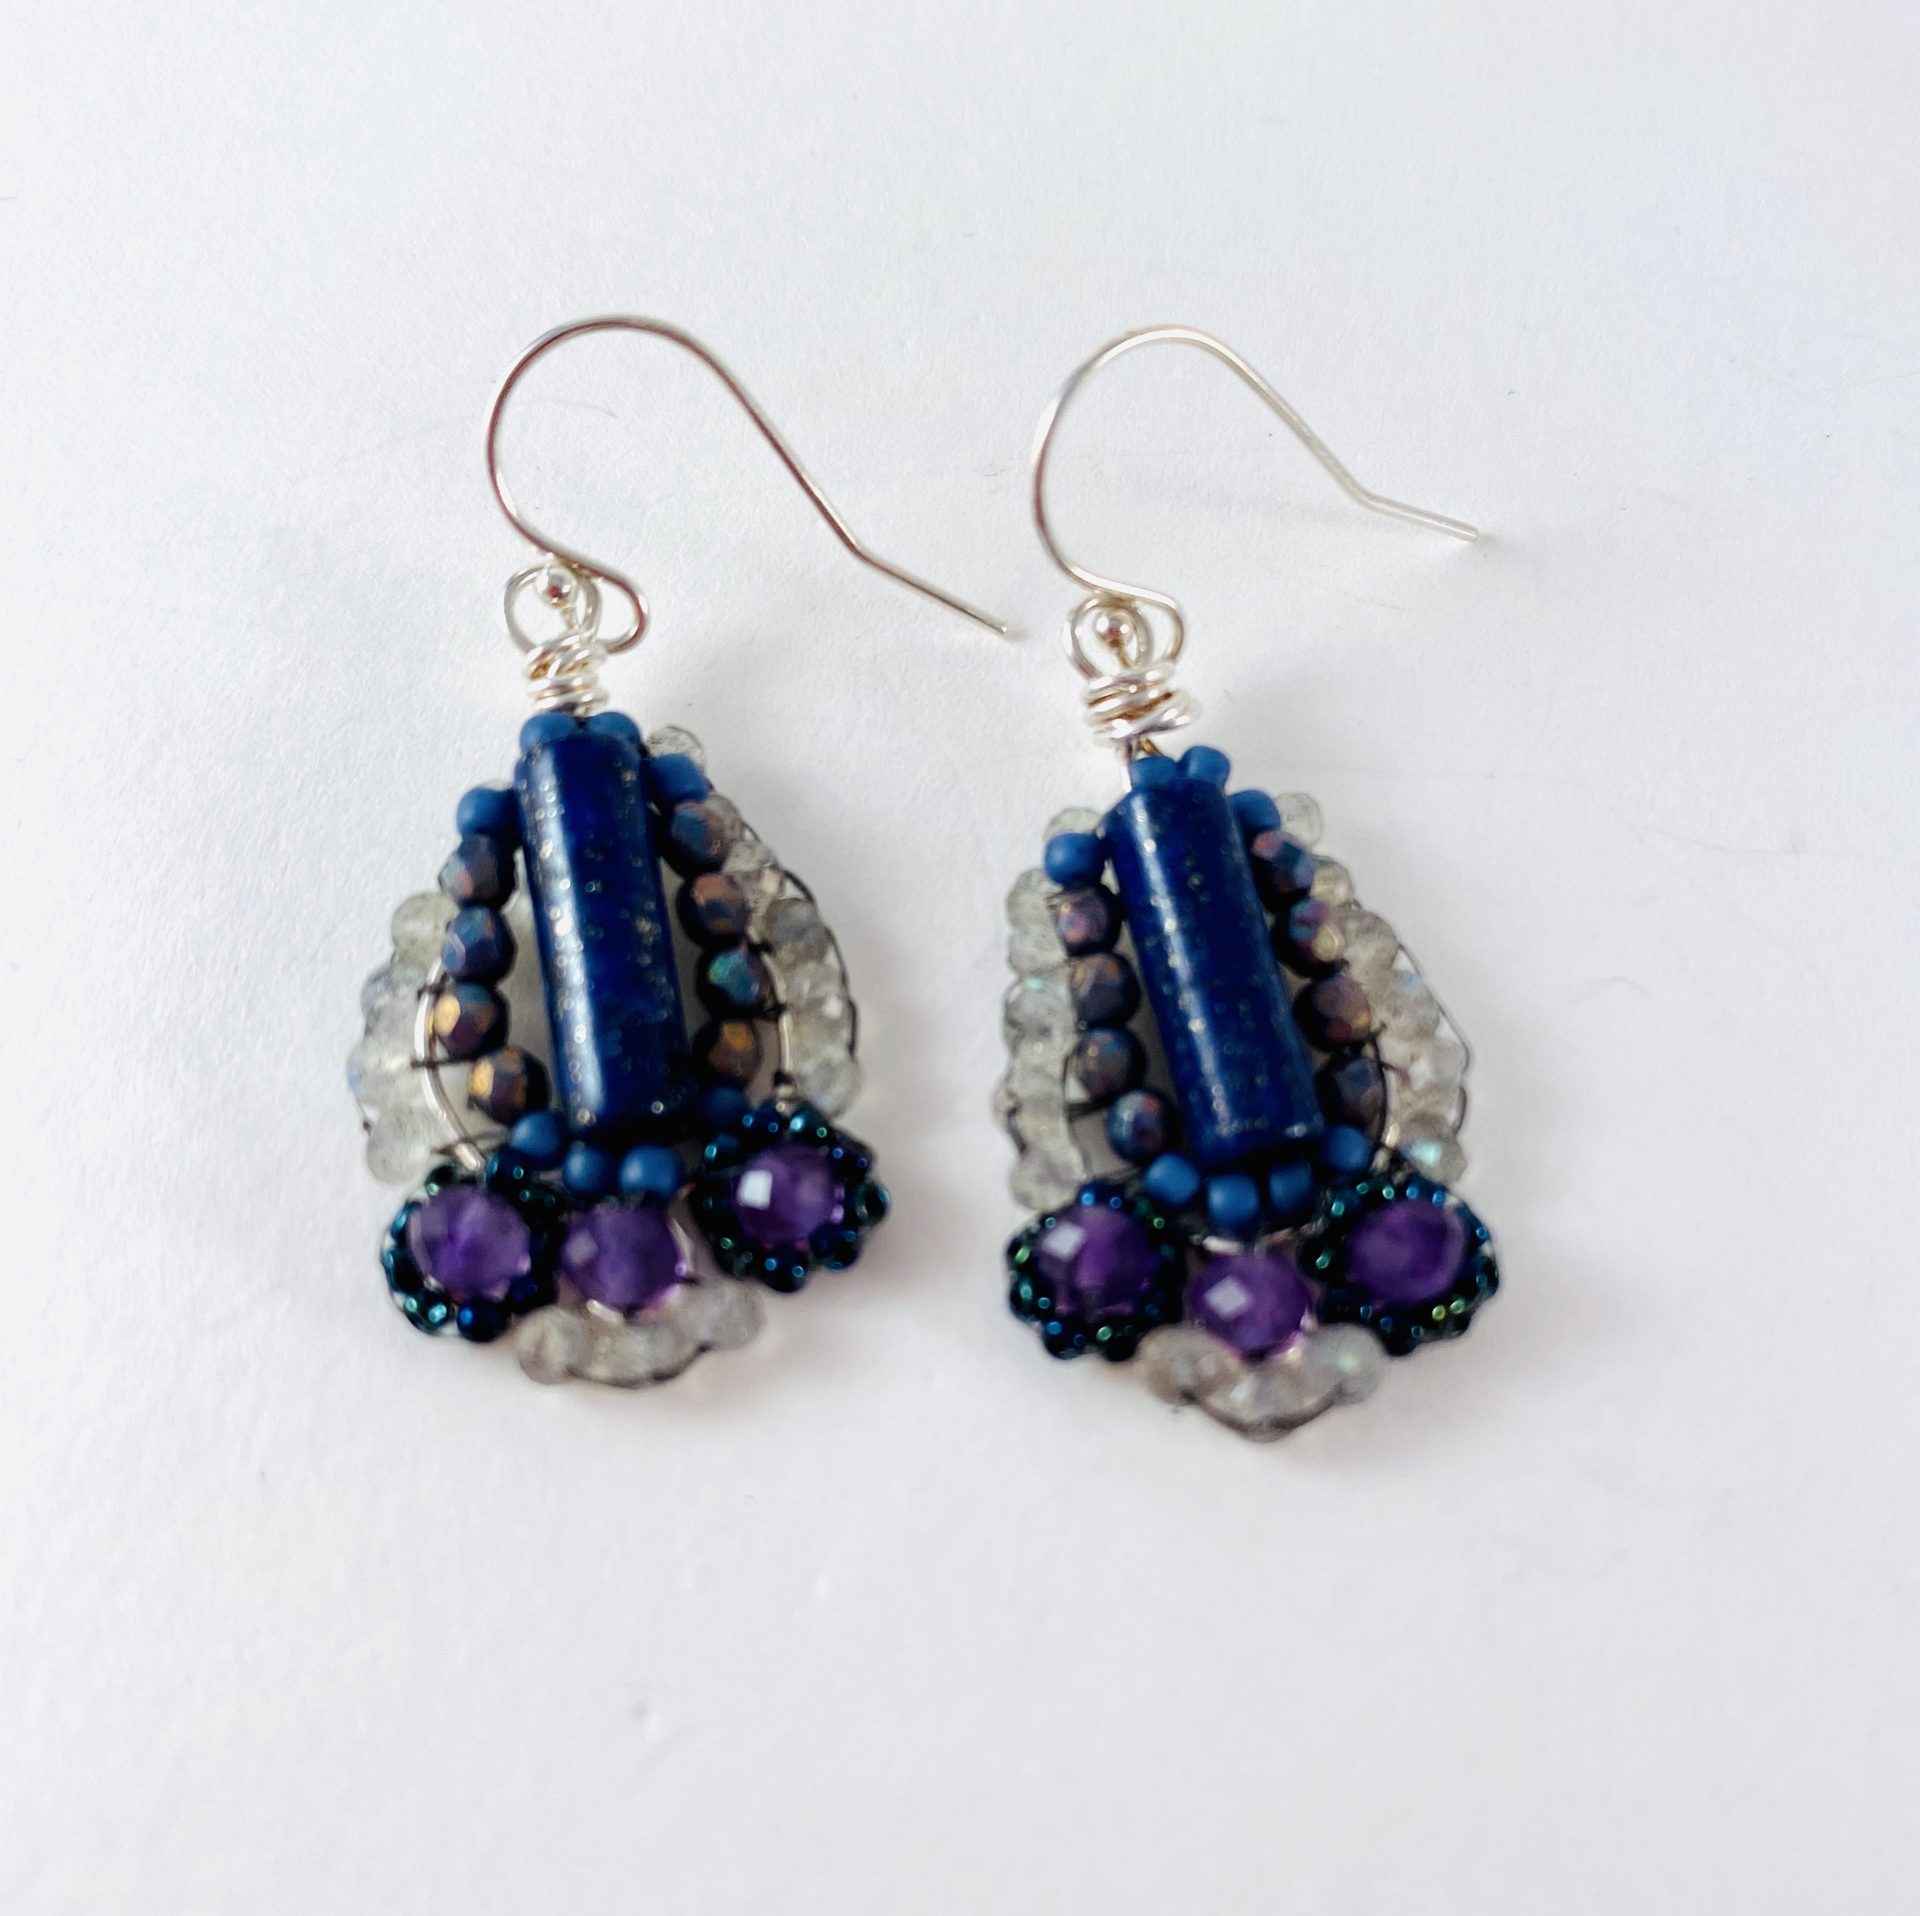 Lapis Lazuli and Amethyst Beaded Earrings by Barbara Duimstra